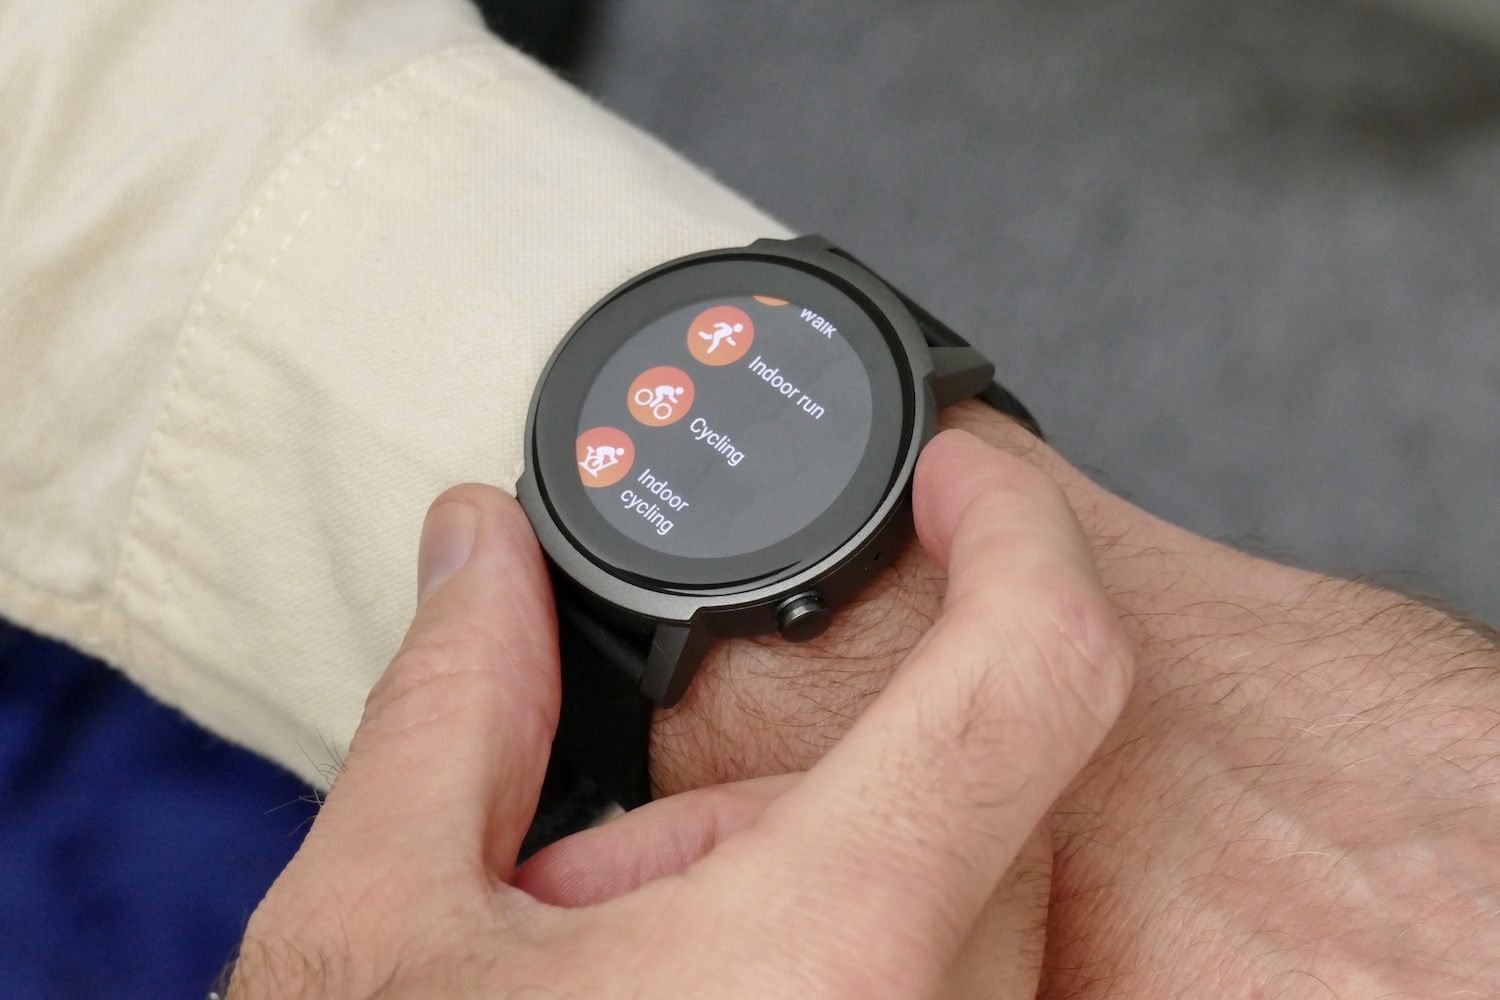 Workout modes on the TicWatch E3.